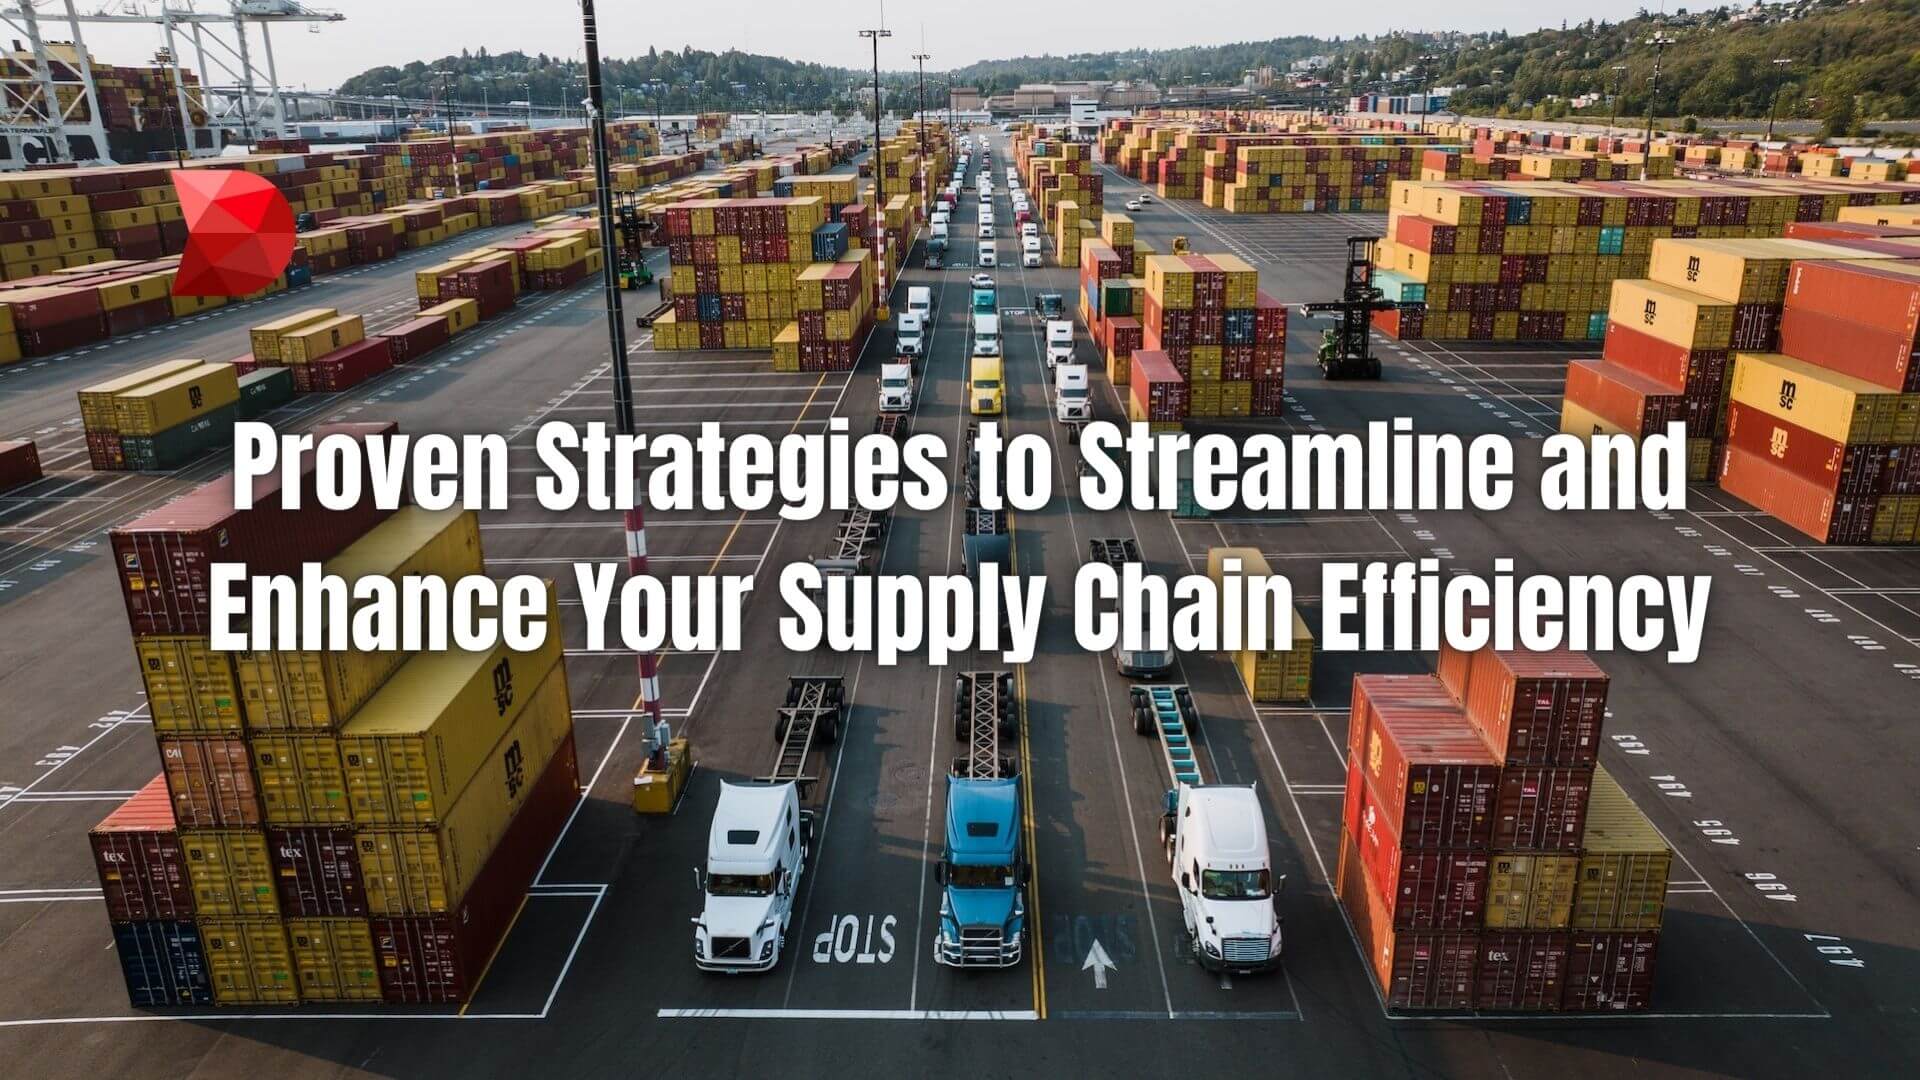 Improving the efficiency of your supply chain requires careful planning, execution, and monitoring. Here are 11 strategies to help you!